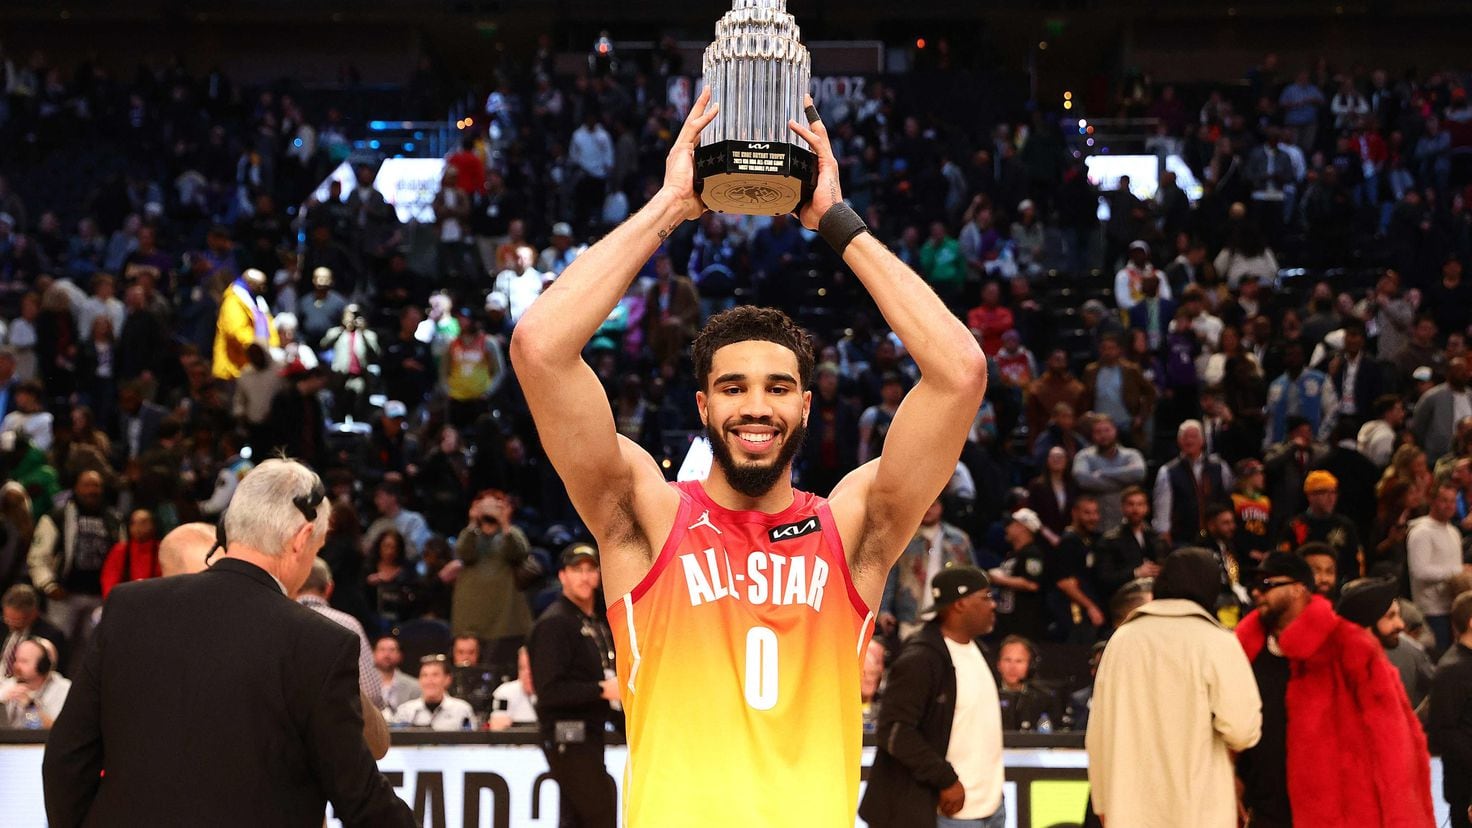 Shining moment: Cavaliers awarded 2022 NBA All-Star Game